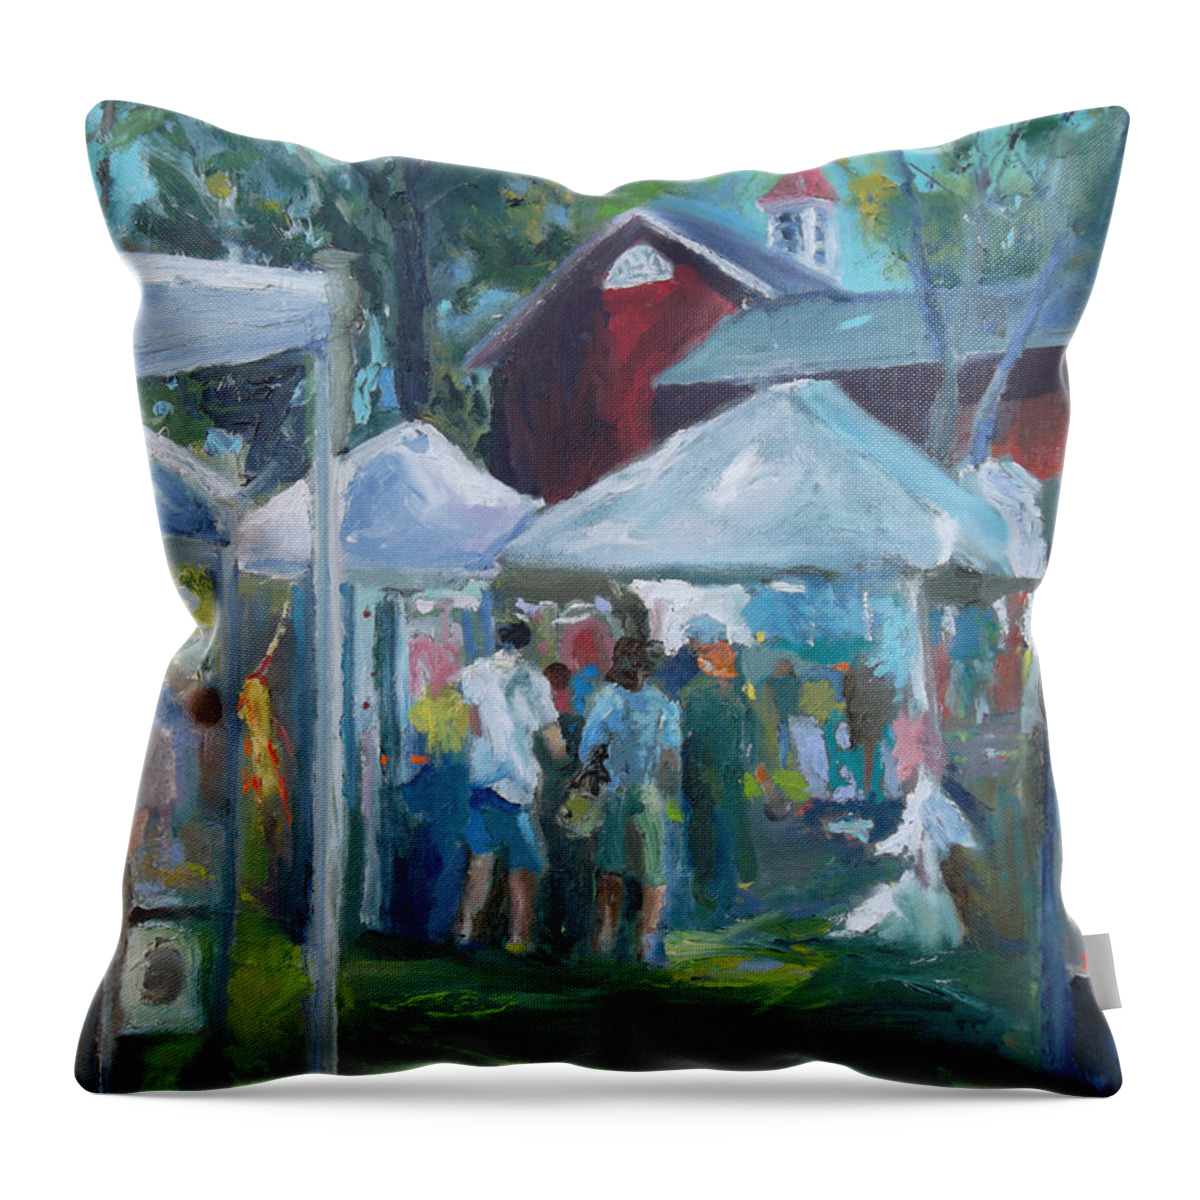 Art Throw Pillow featuring the painting Art in the Park by Susan Esbensen